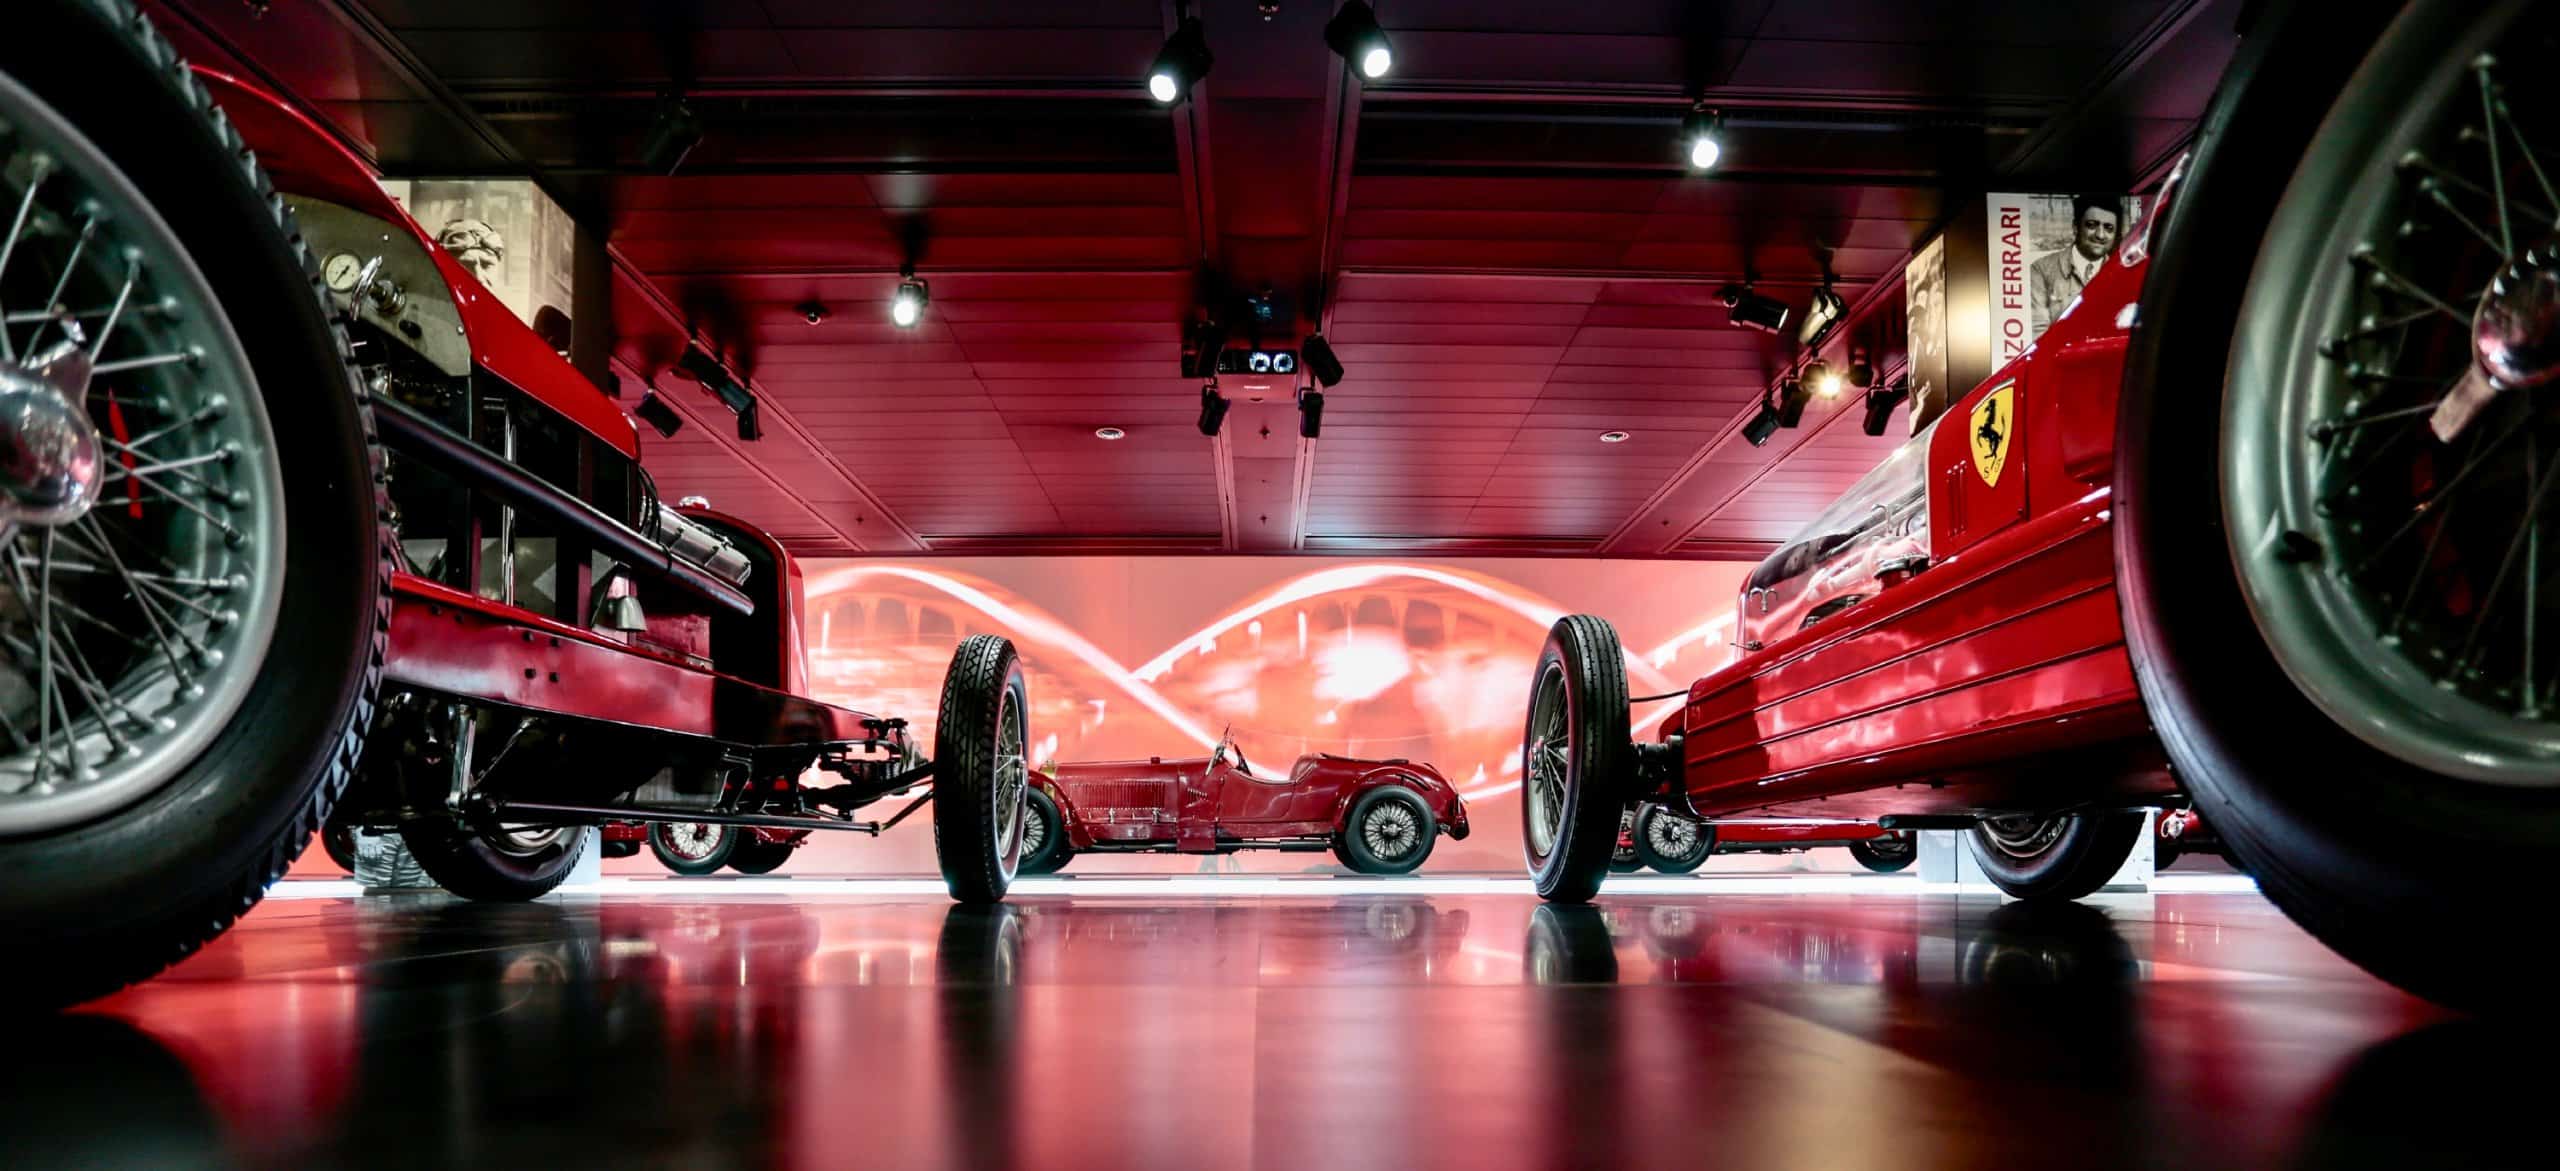 Alfa Romeo Museum, Red-ee for visitors: Alfa Romeo re-opens its museum, ClassicCars.com Journal